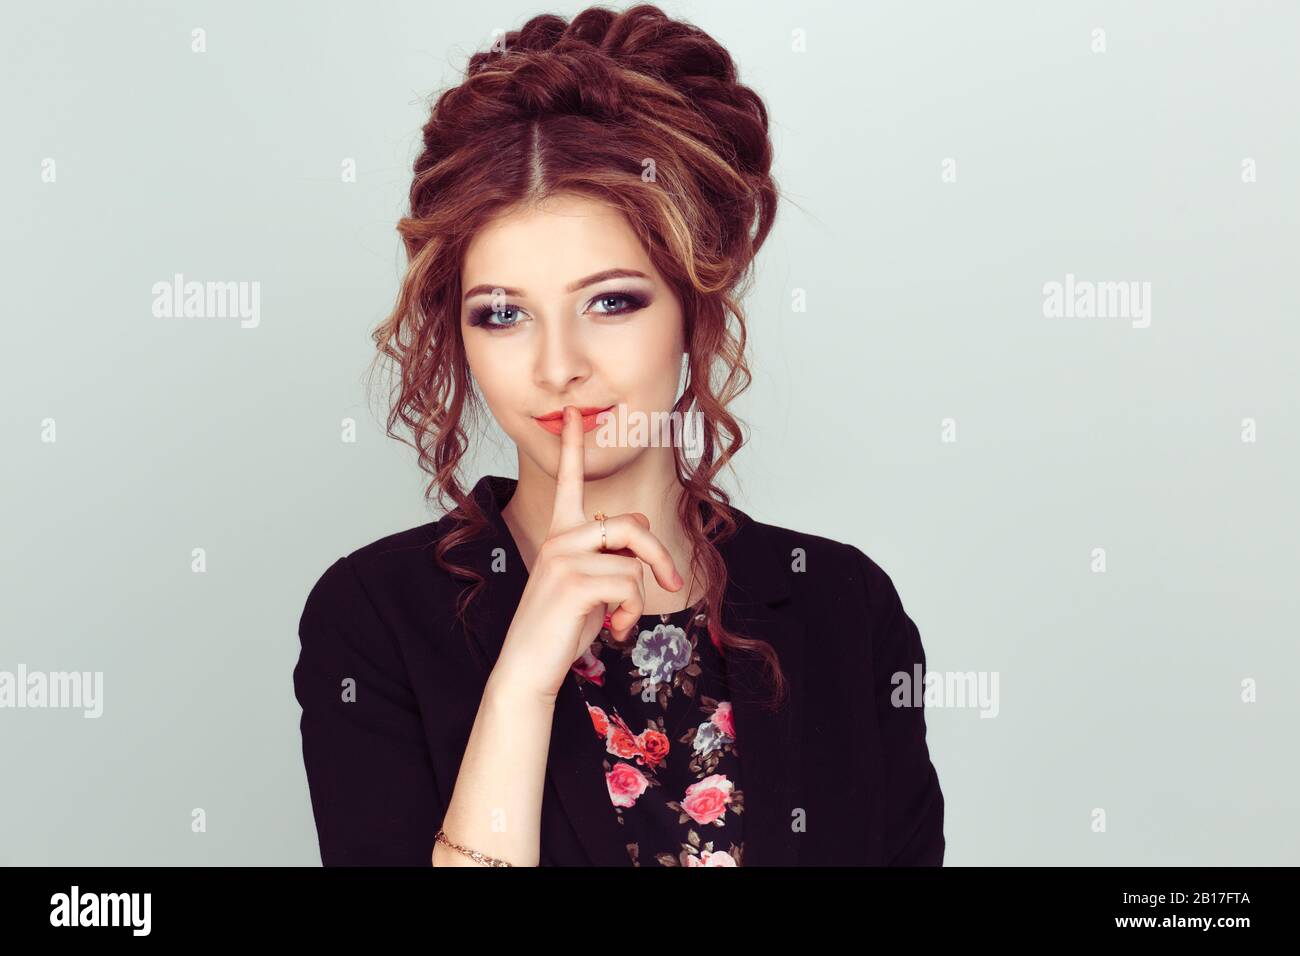 Shh. Woman asking for silence or secrecy with finger on lips hush hand gesture light green background wall. Pretty girl placing fingers on lips, shhh Stock Photo